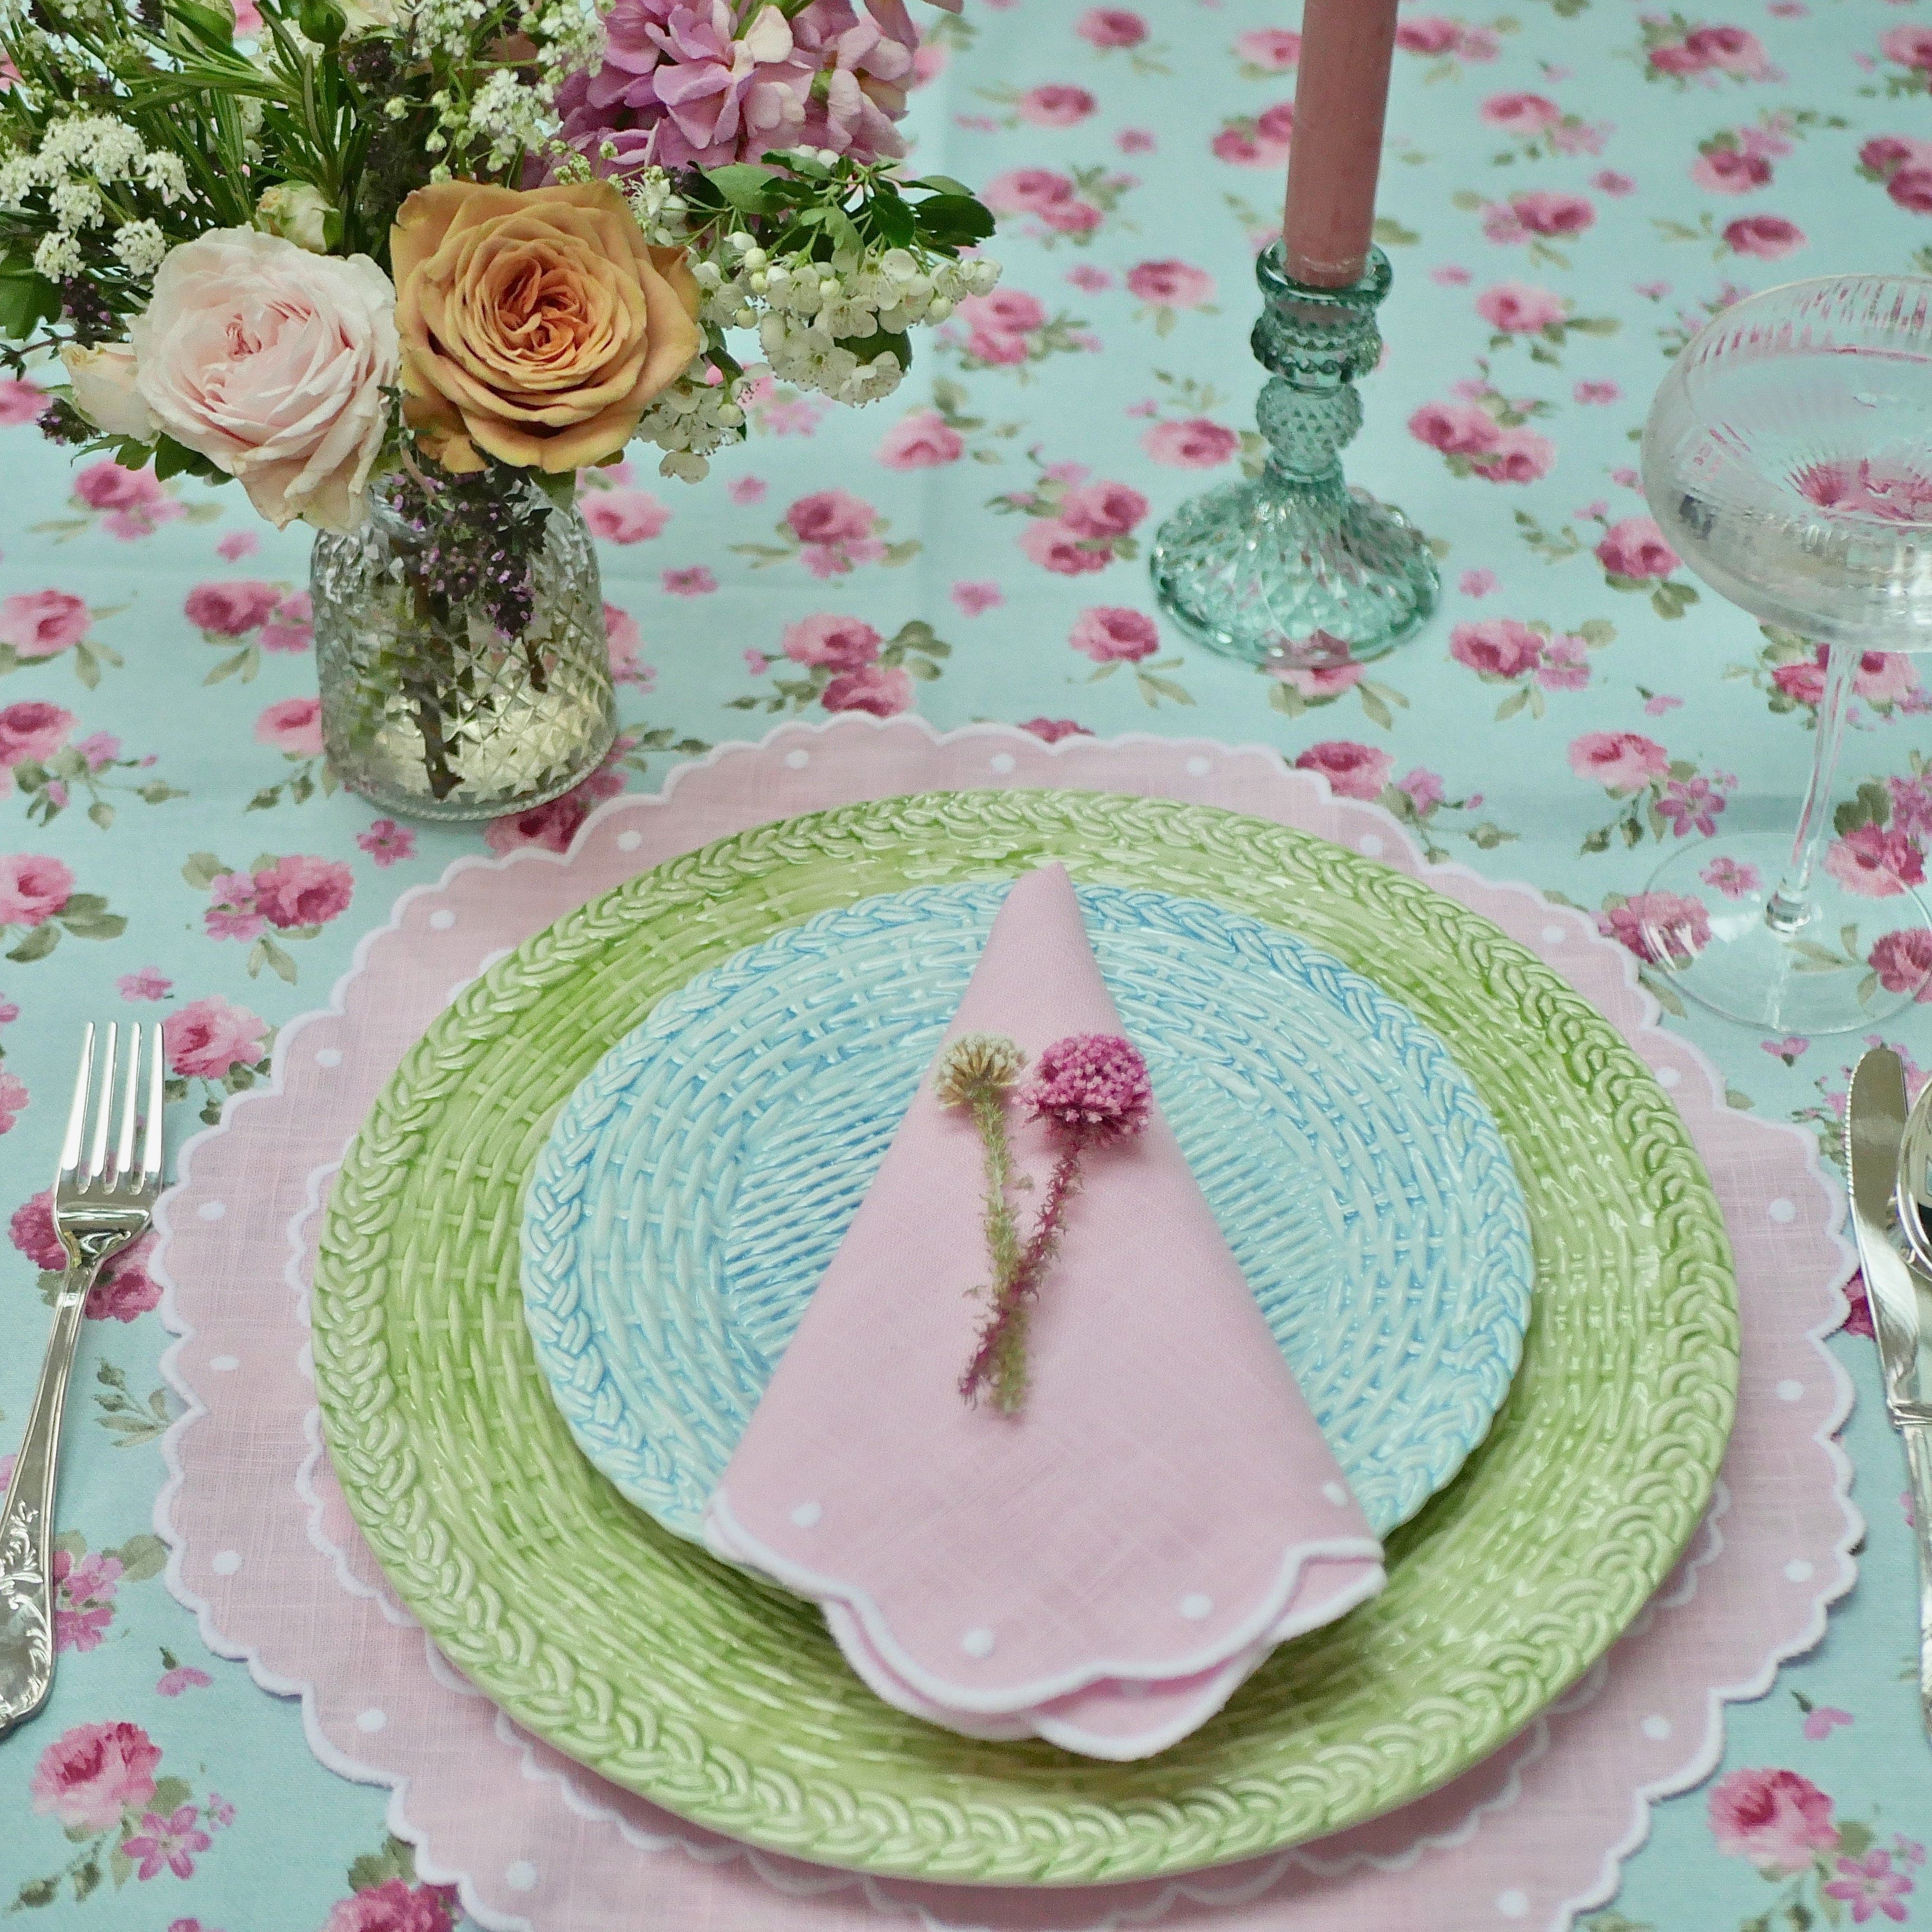 ROSY PINK SCALLOPED PLACEMATS - Pair